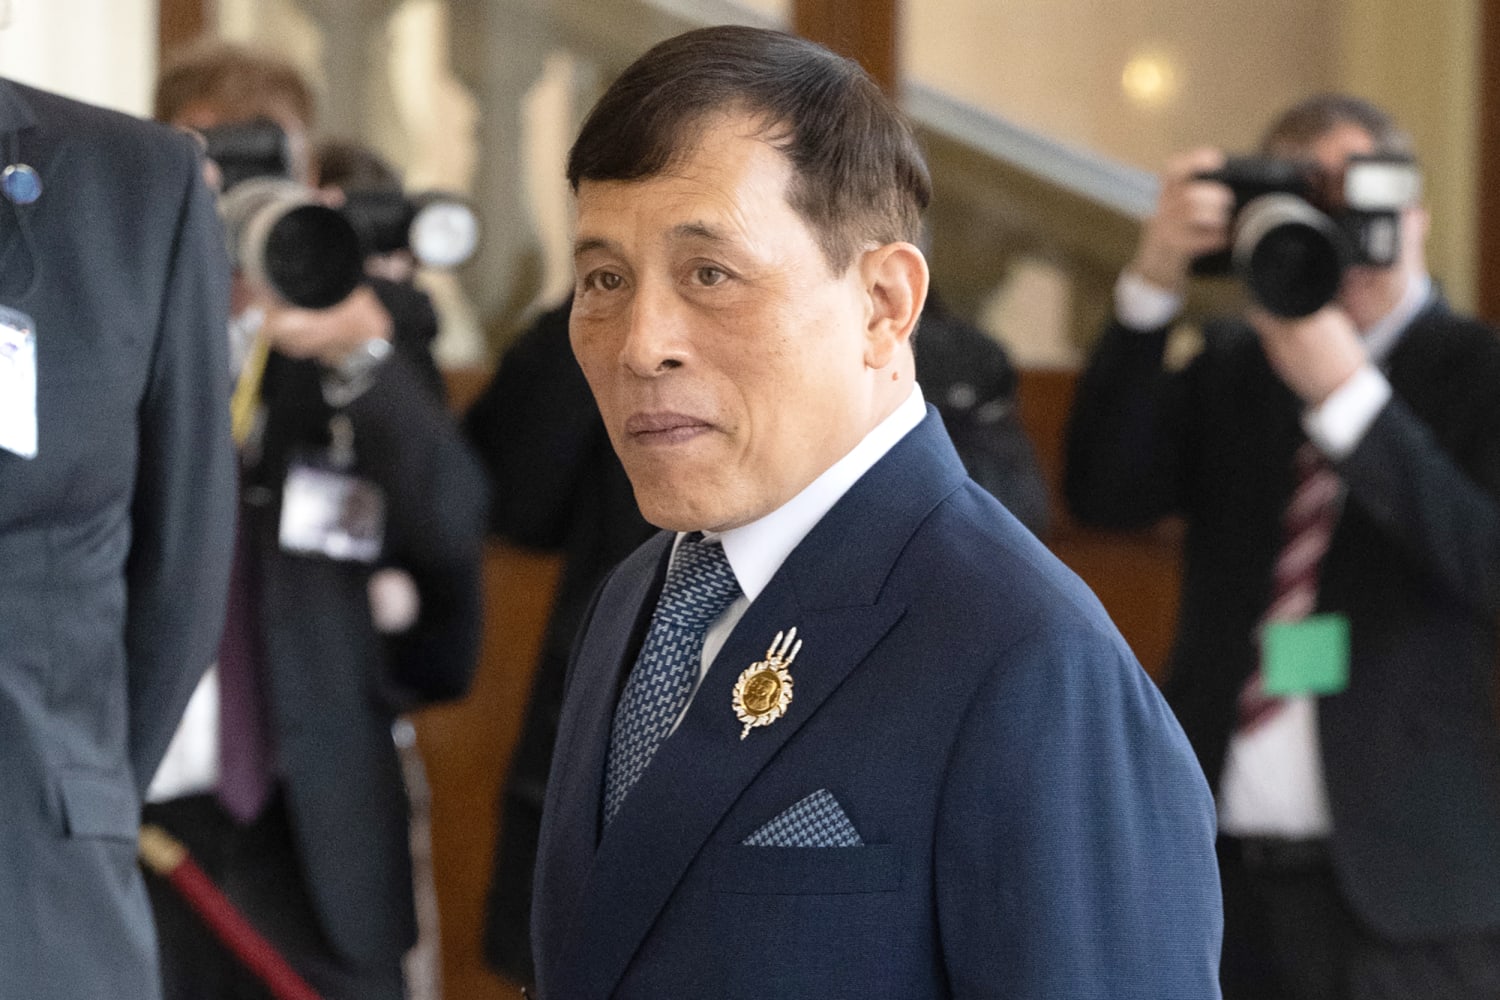 A Thai man faces 50 years in prison for insulting the monarchy